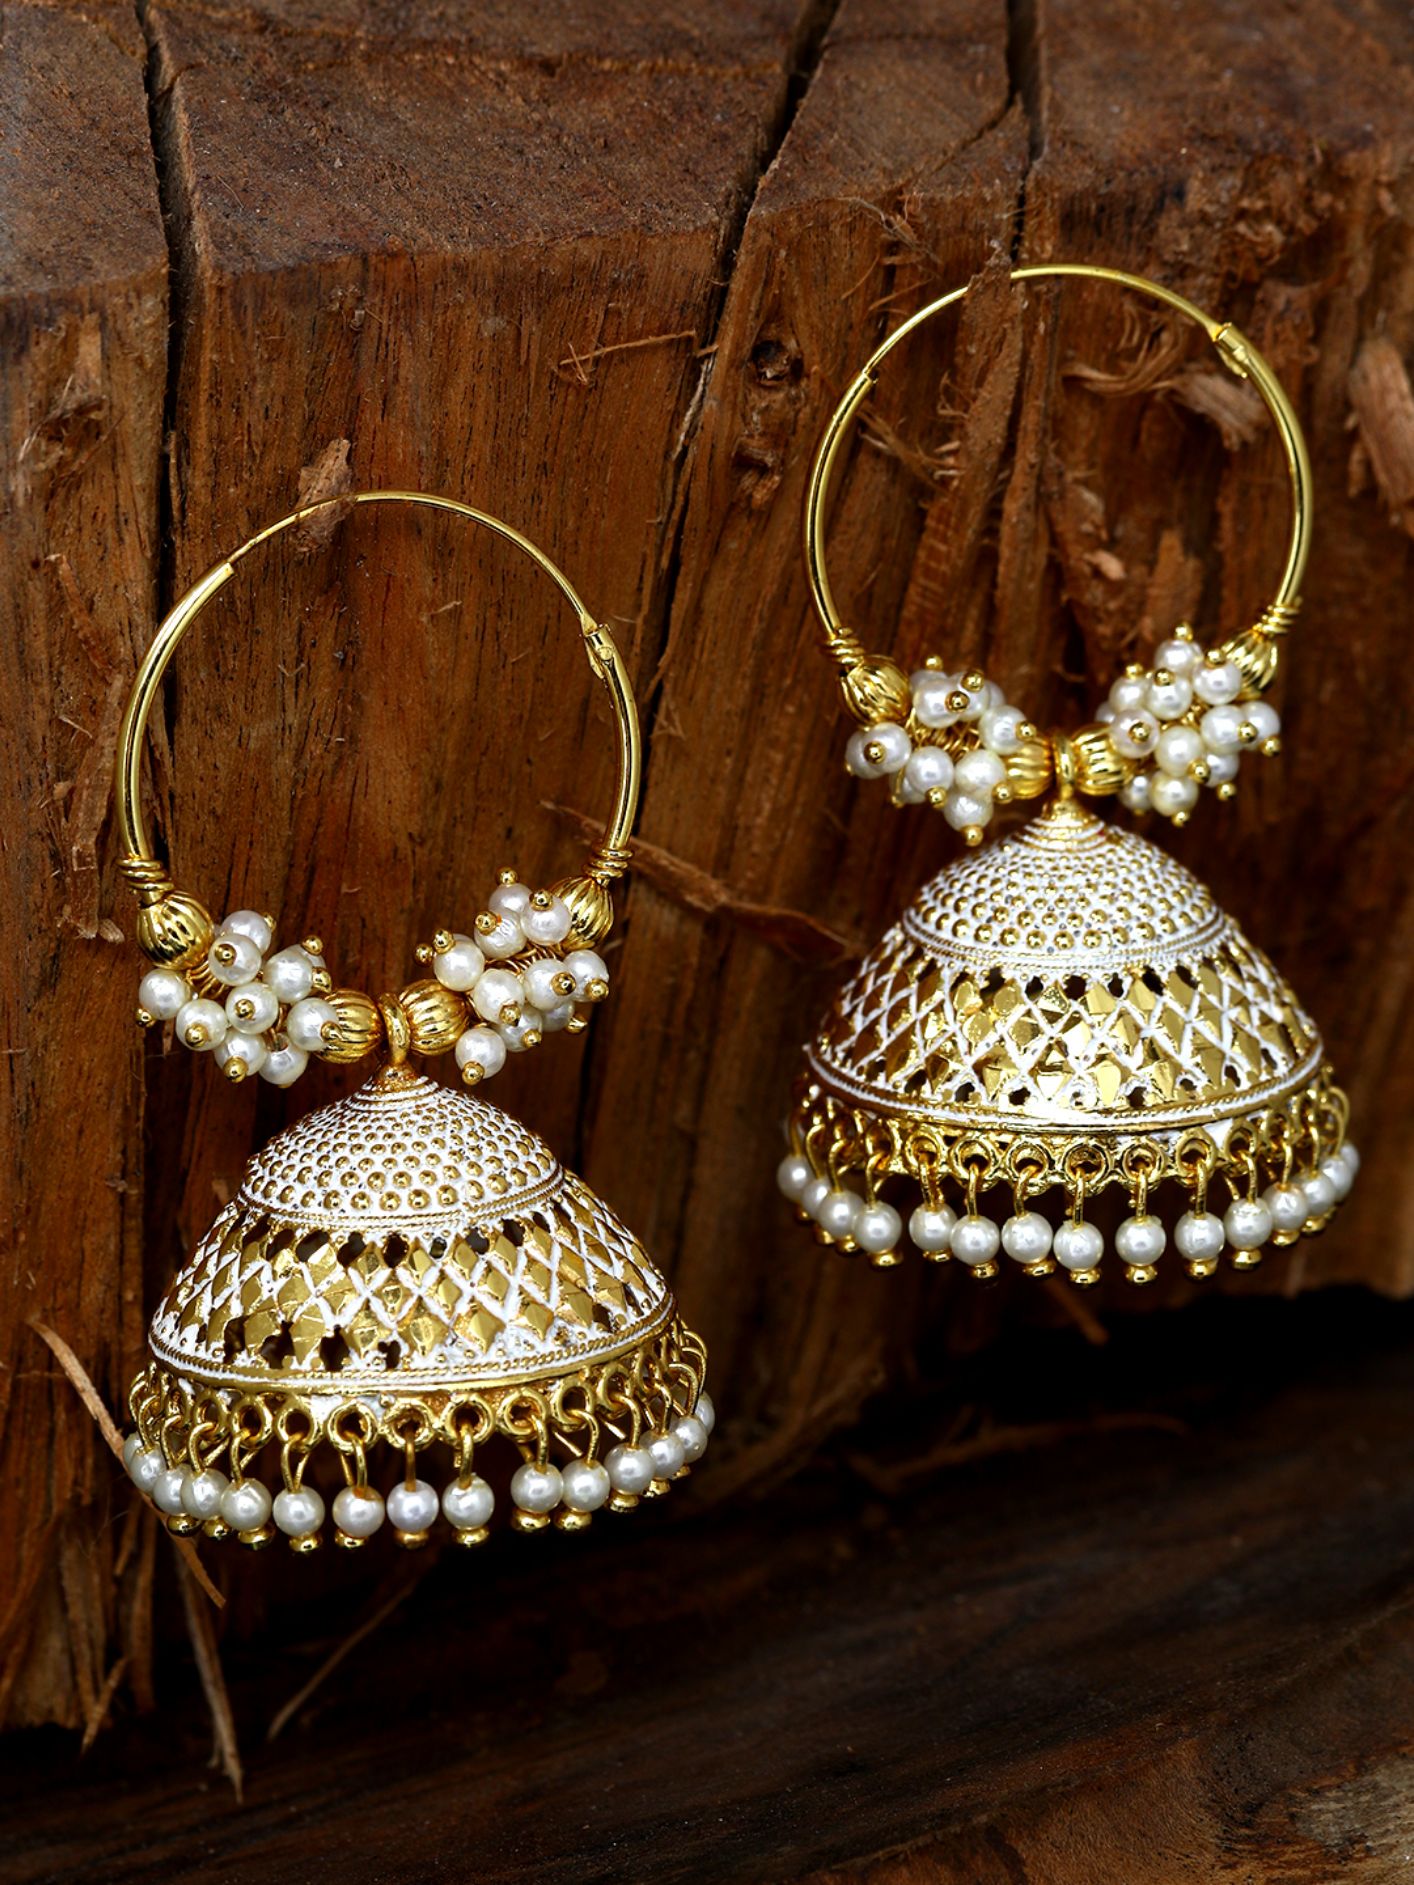 Women's White & Gold-Plated Enamelled Dome Shaped Jhumkas - Anikas Creation